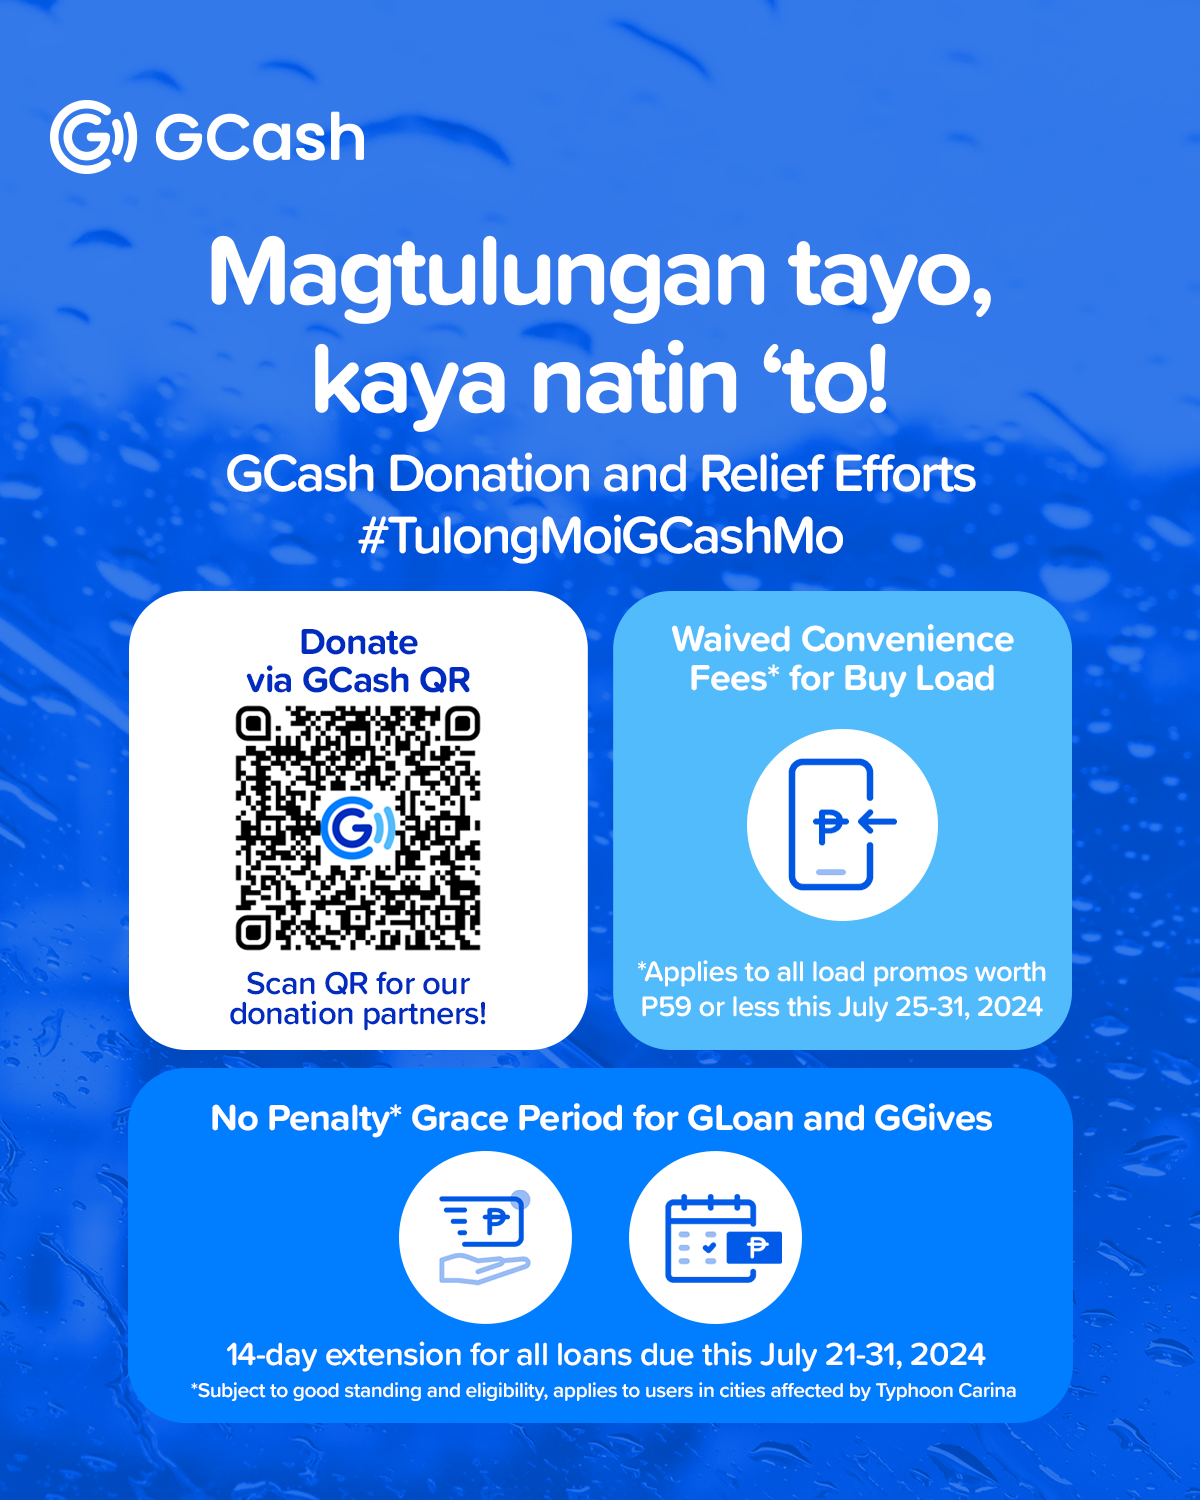 GCash extends assistance to users affected by typhoon Carina